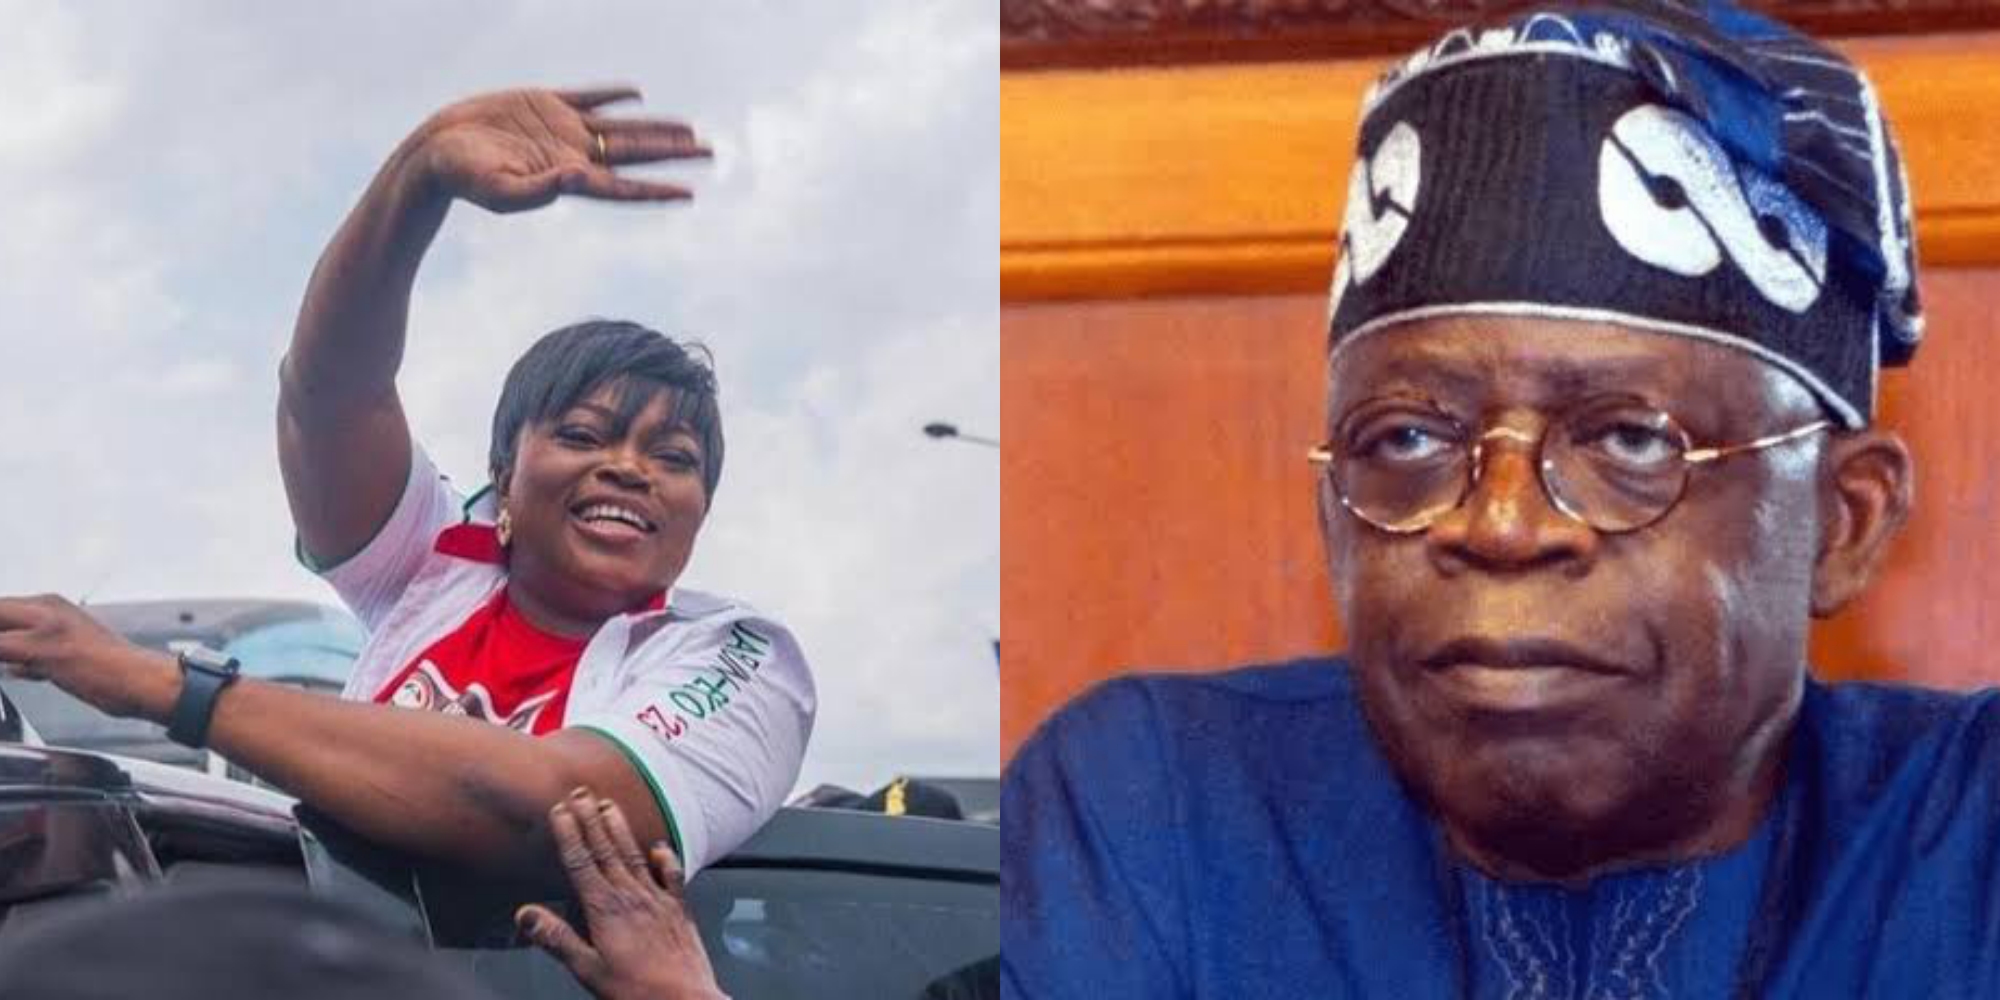 Funke Akindele Continues Lagos Campaign, Remains Unmoved By Tinubu’s Threats